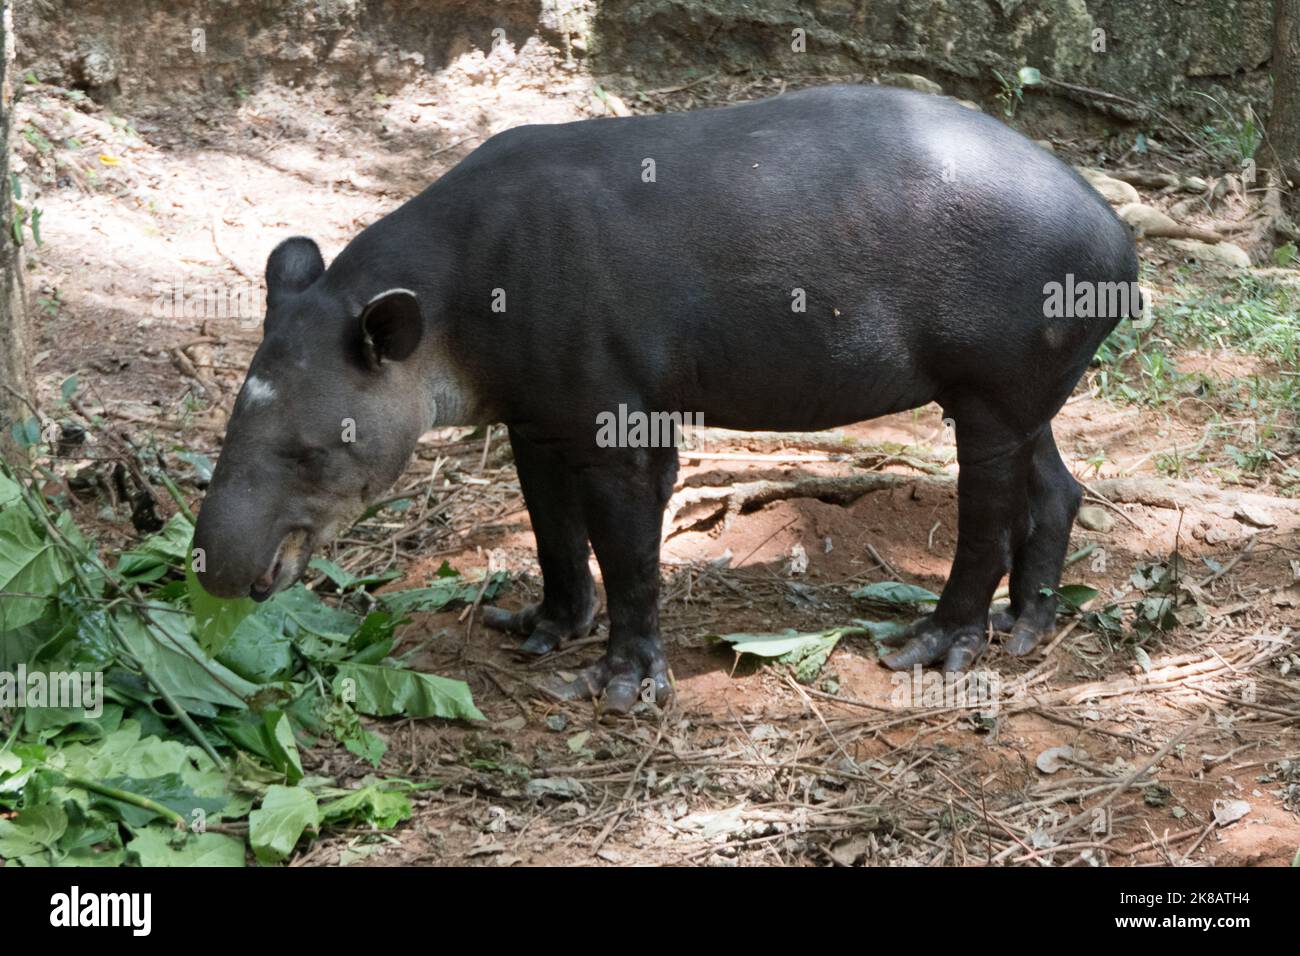 The Baird's tapir (Tapirus bairdii), also known as the Central American tapir, in zoo cage in Chiapas, Mexico. Herbivorous mammal eating leaves in enc Stock Photo